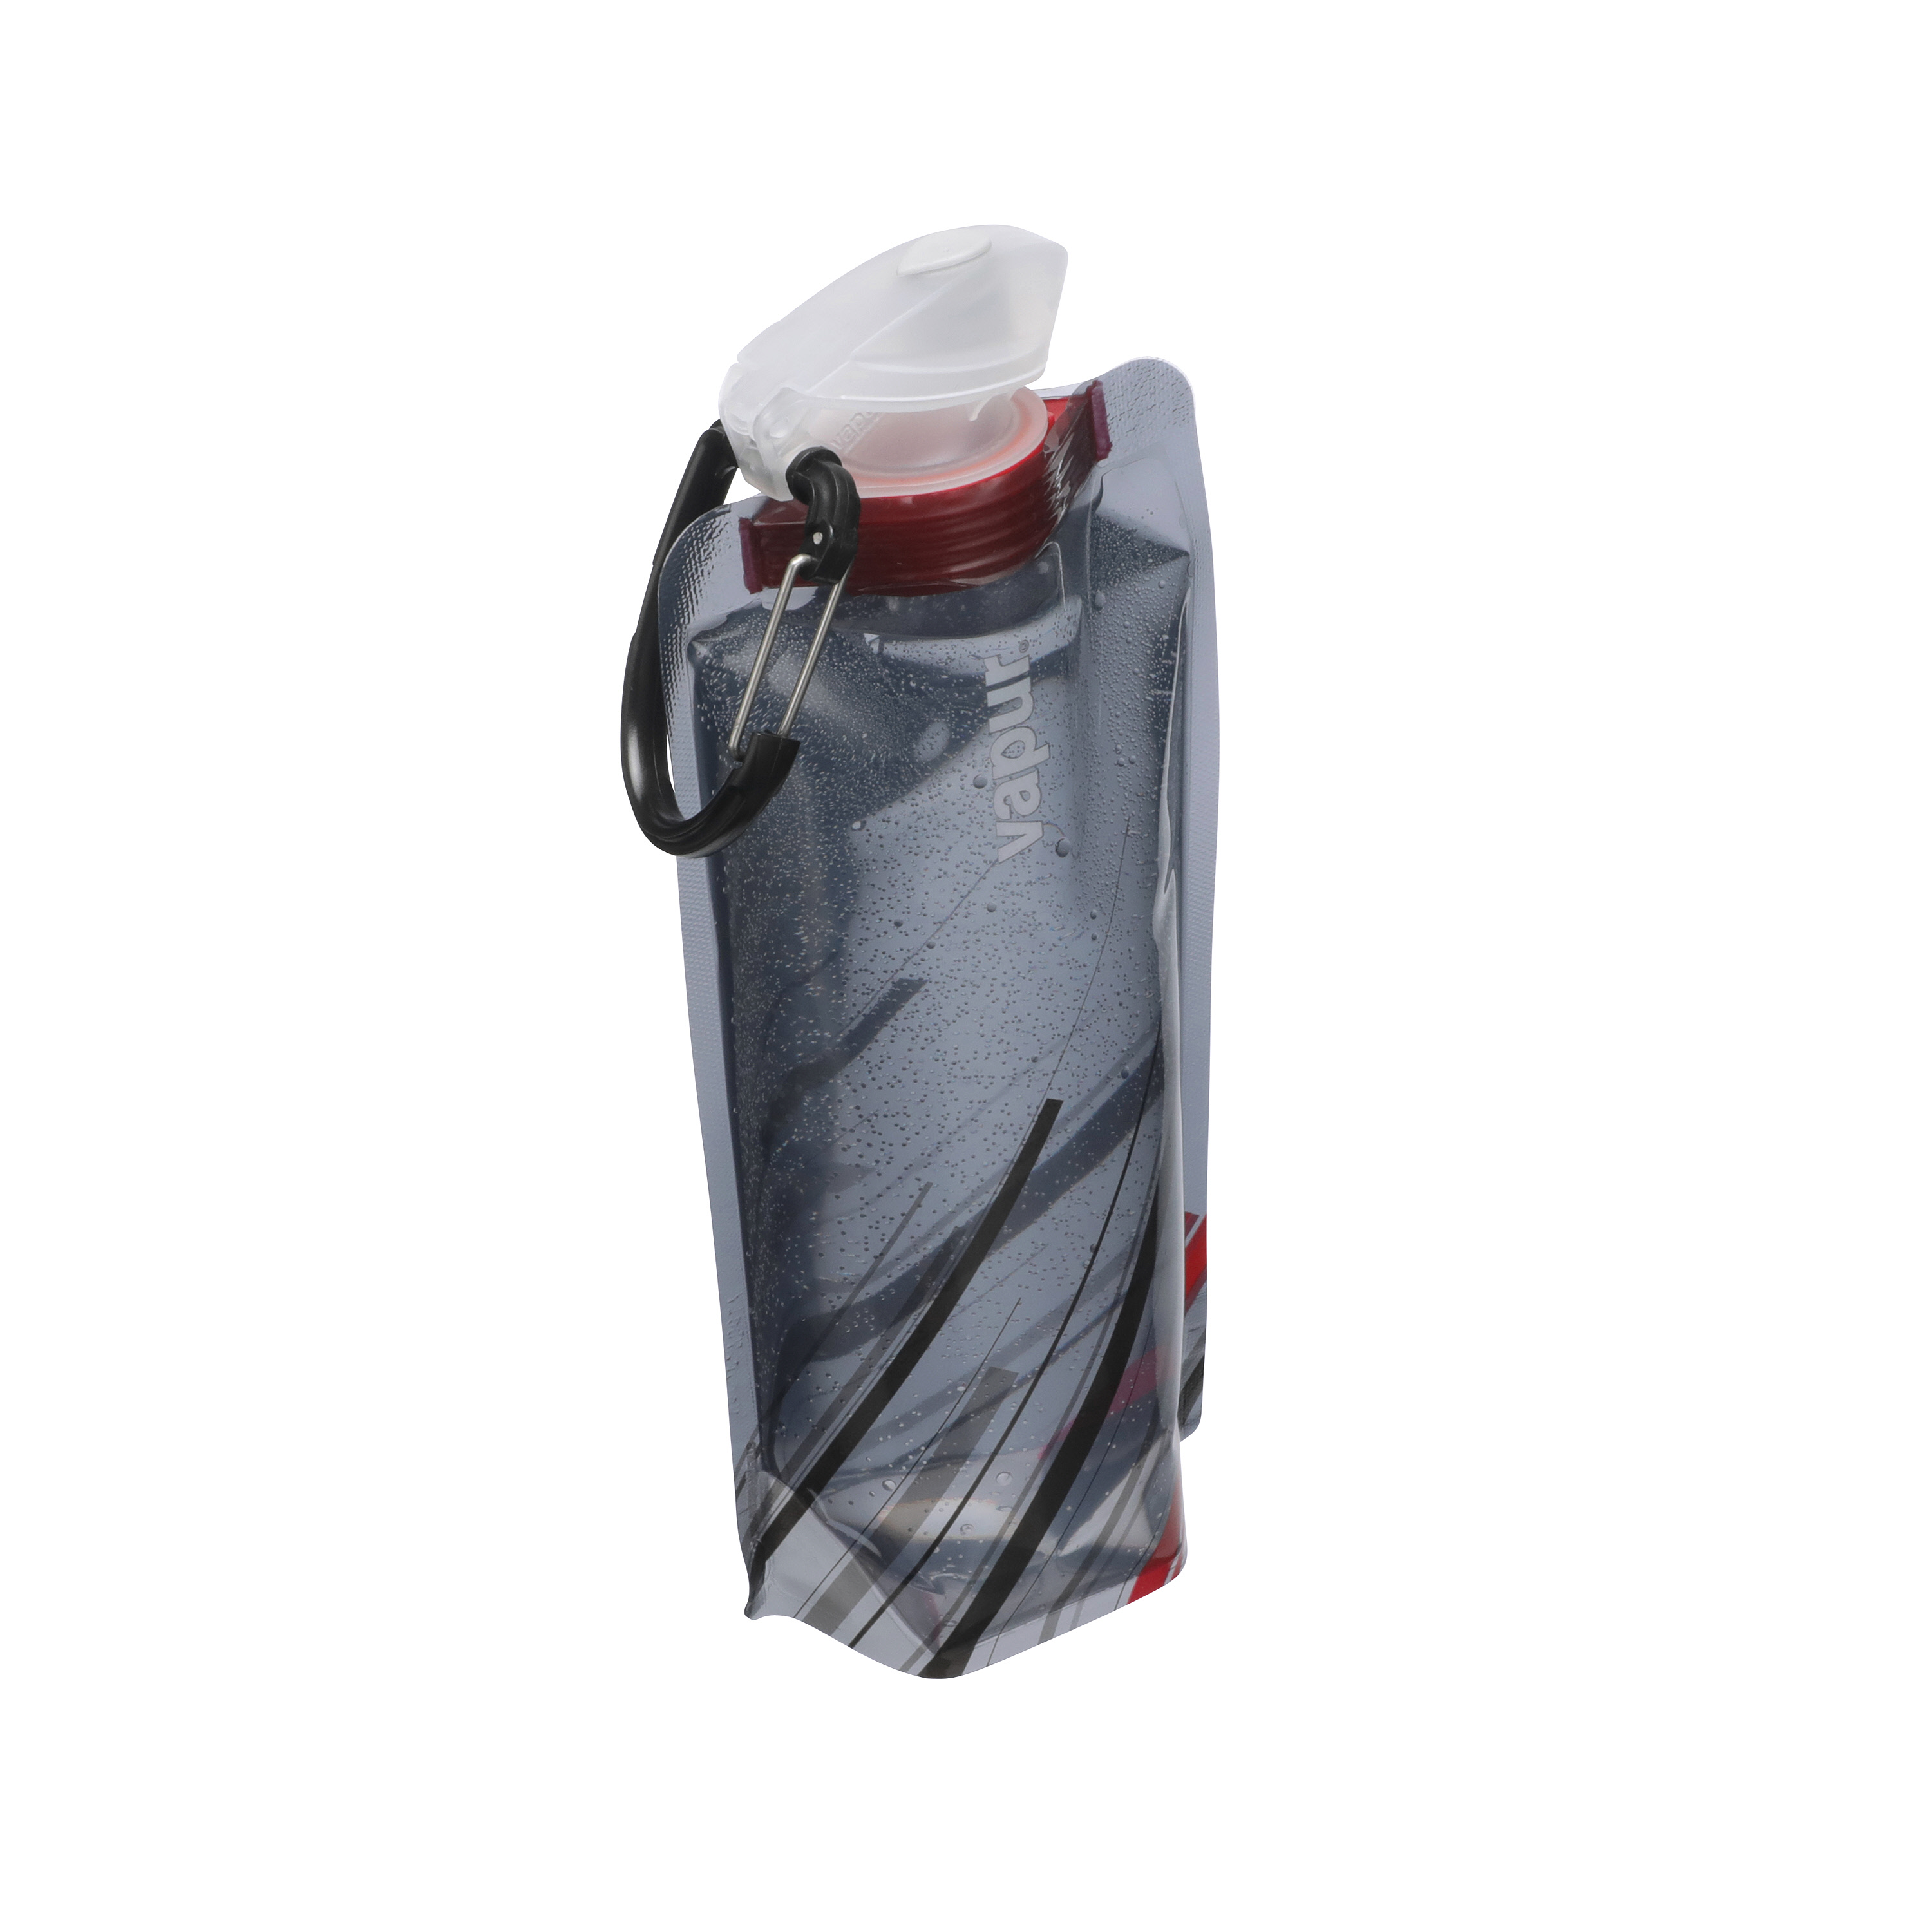 Vapur .7 Liter Wide Mouth Collapsible Water Bottle – Flashpacker Co